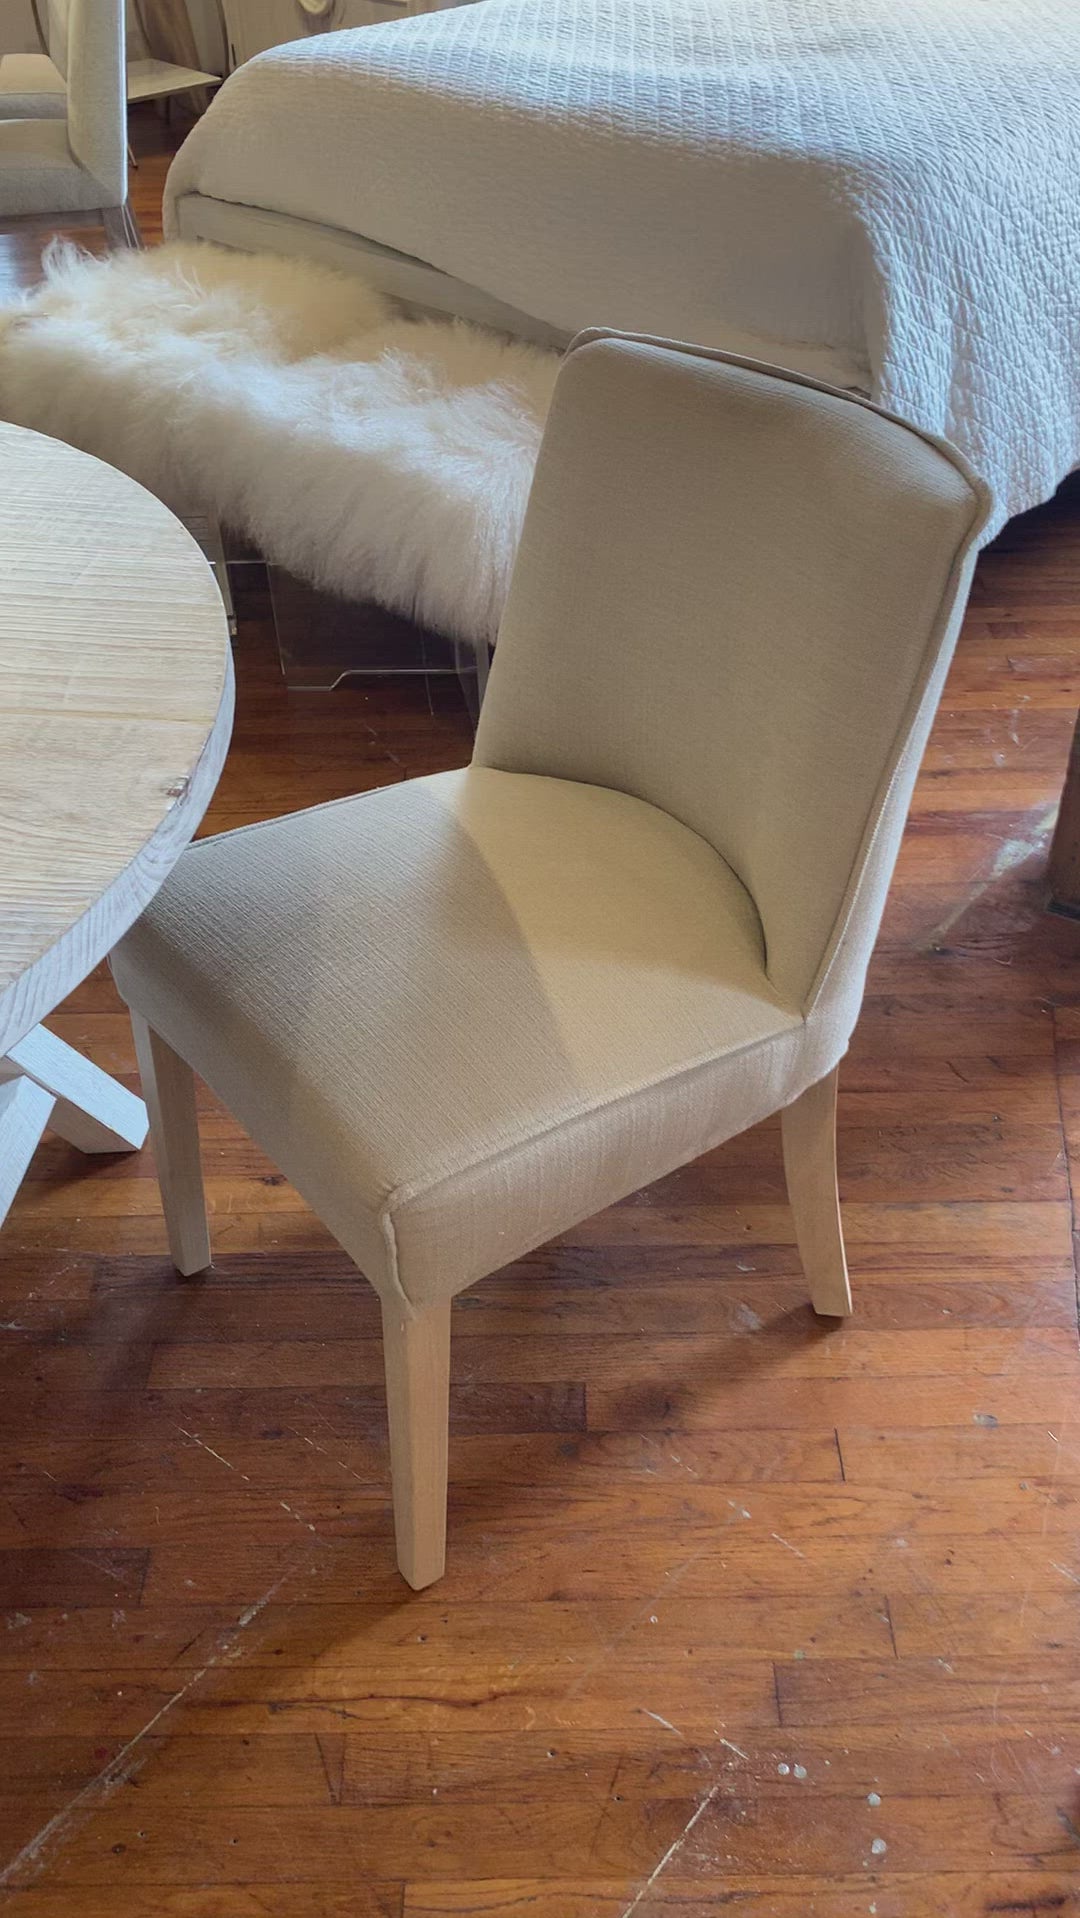 This Tiba Dining Chair is both classic and traditional -- an elegant choice for any dining room or other space! Linen Performance Fabric Size: 20"l x 22"d x 34"h 